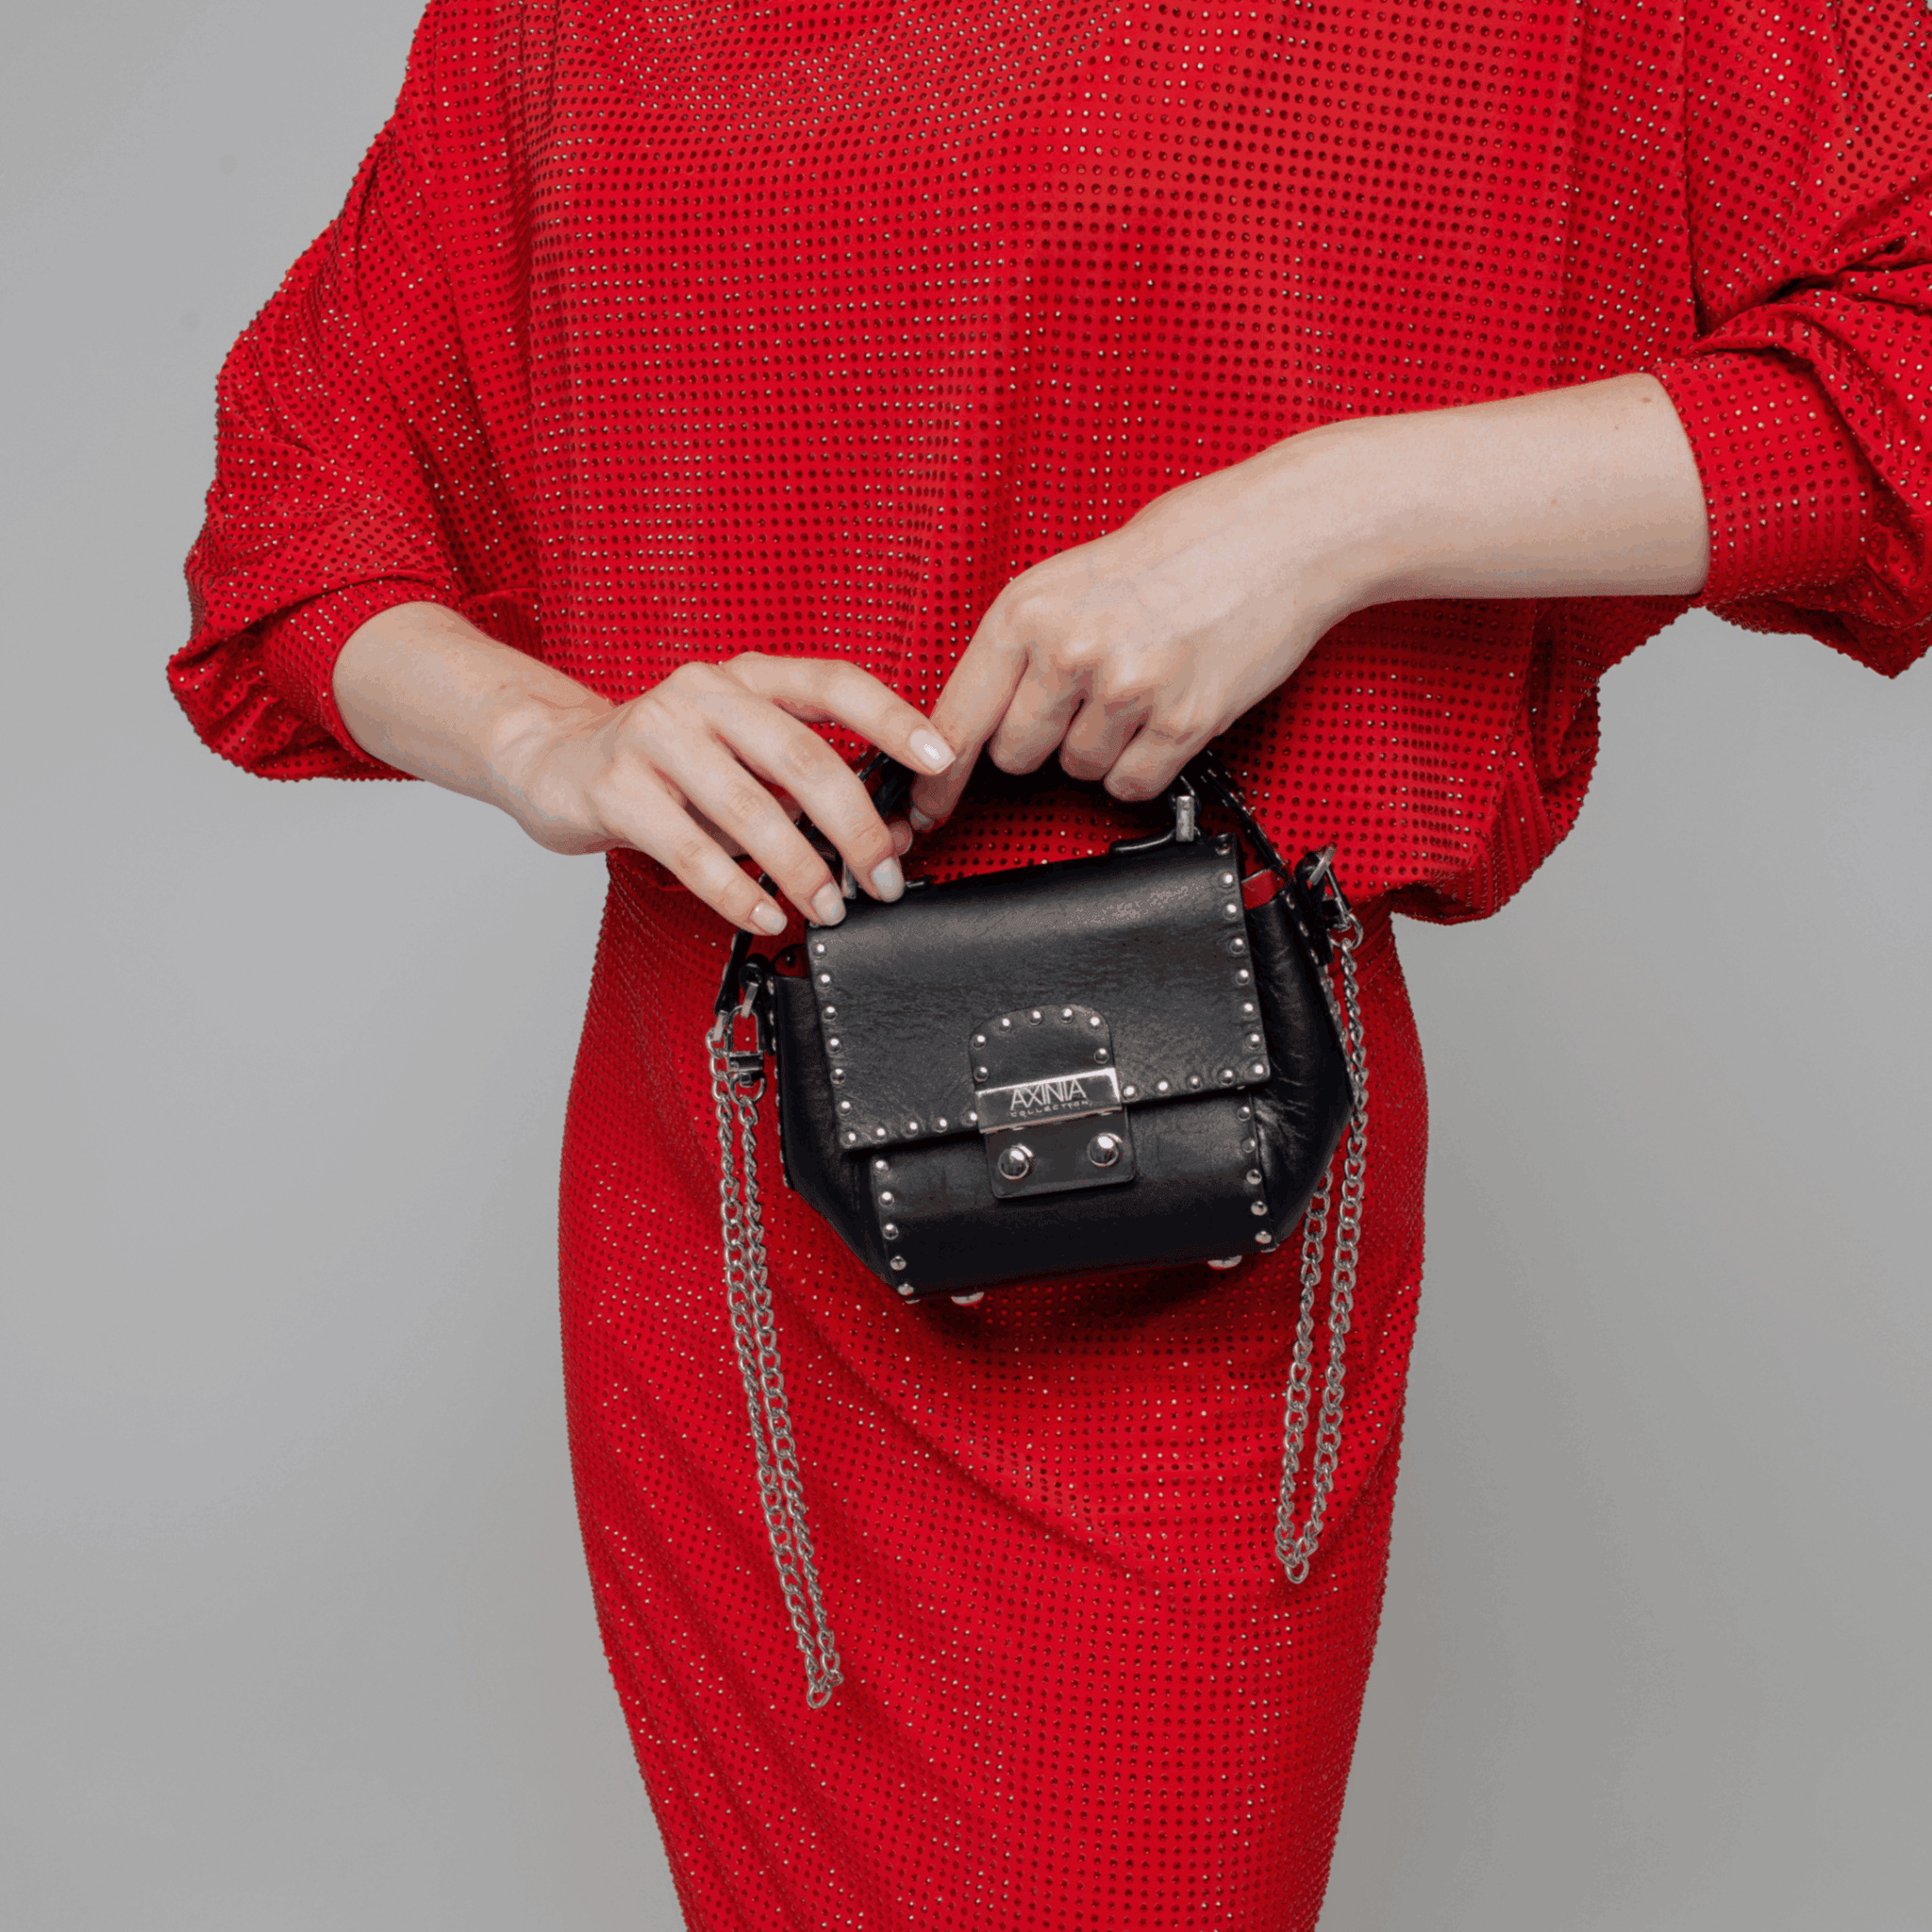 Exquisite detail of Axinia Mini Bag Riveted showcasing the fine craftsmanship and elegant design characteristic of Axinia Collection 's luxury collection.